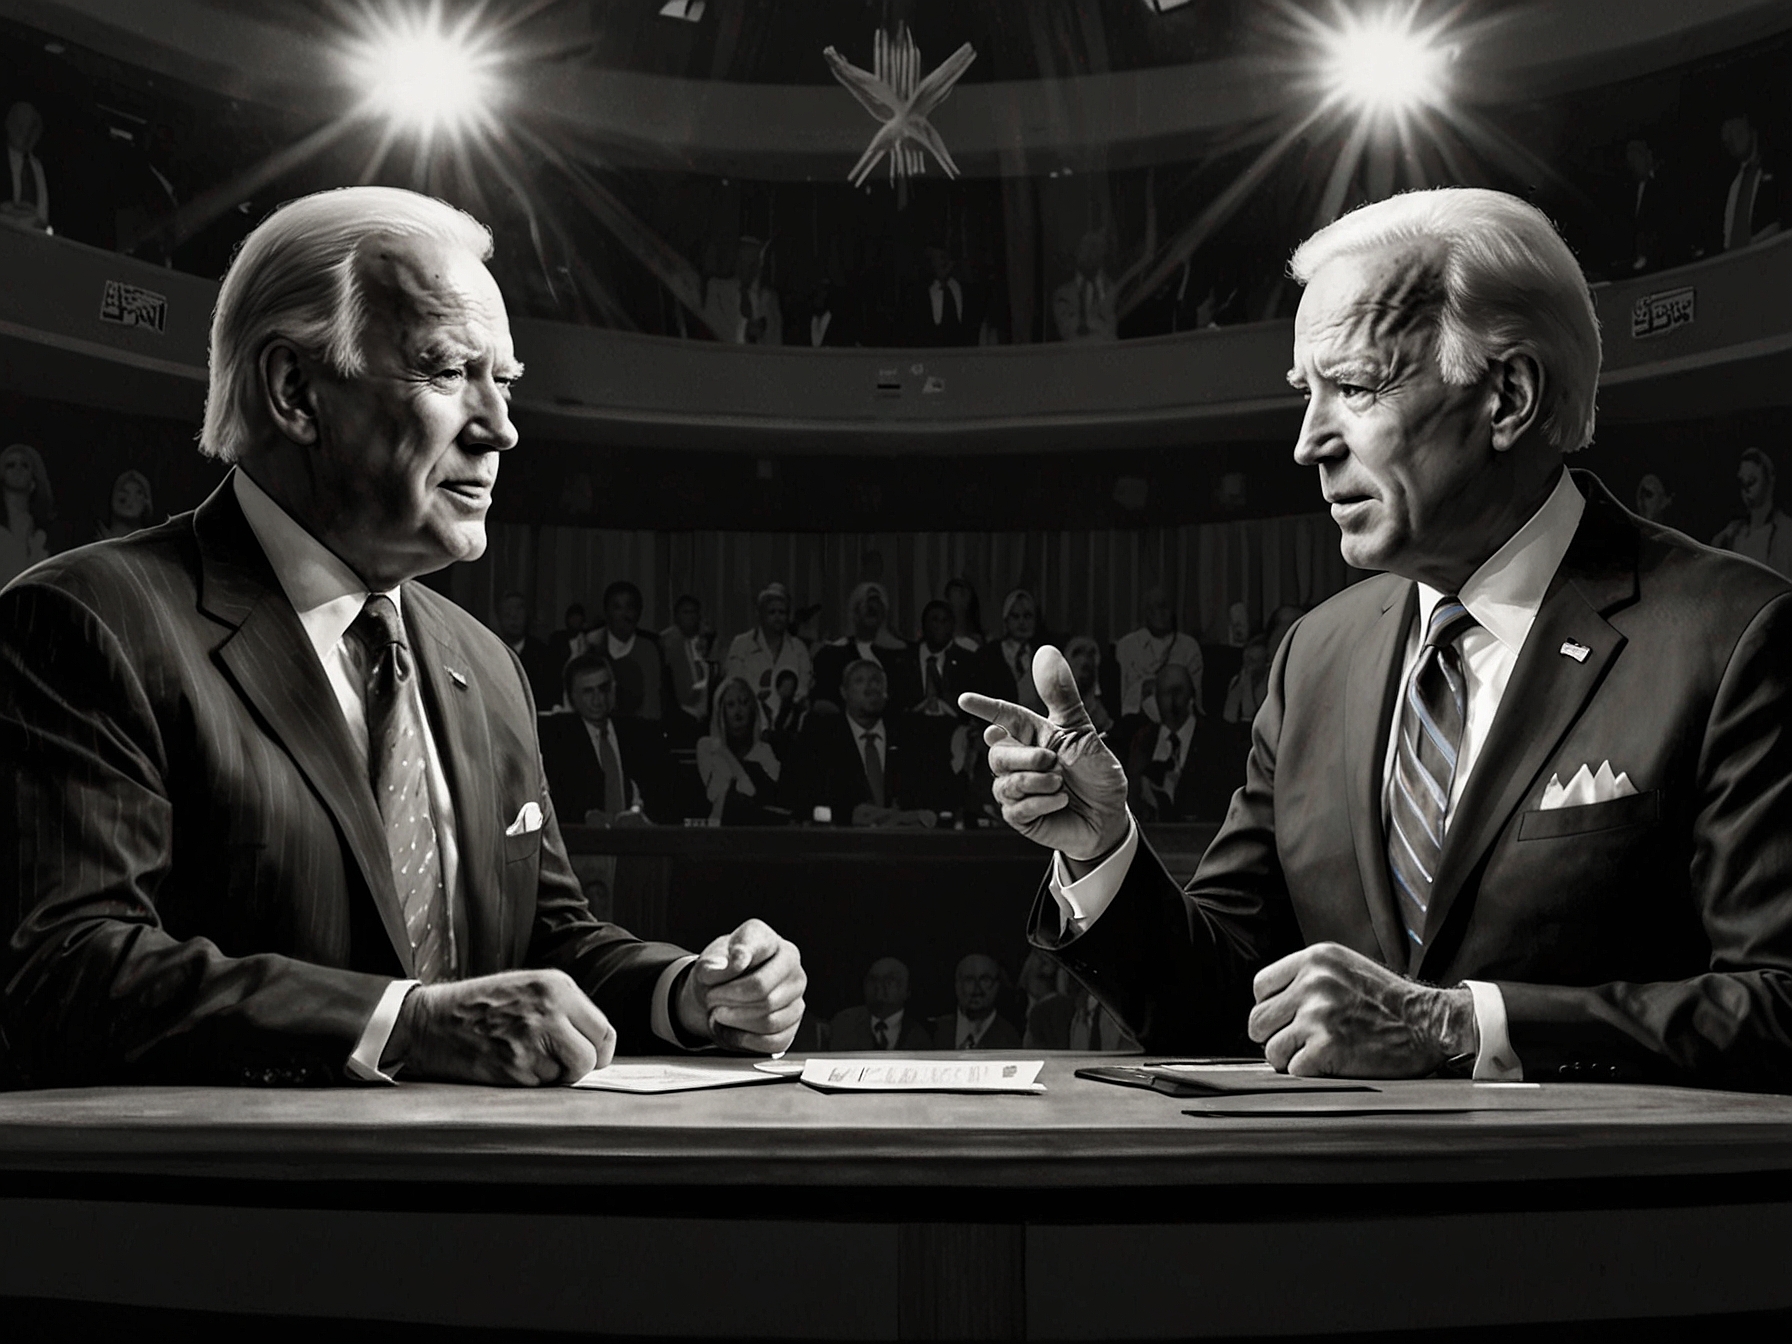 A split-screen image showing Trump and Biden during a debate, highlighting contrasting viewpoints on health care and public safety, with Trump stressing law and order and Biden addressing health care reforms.